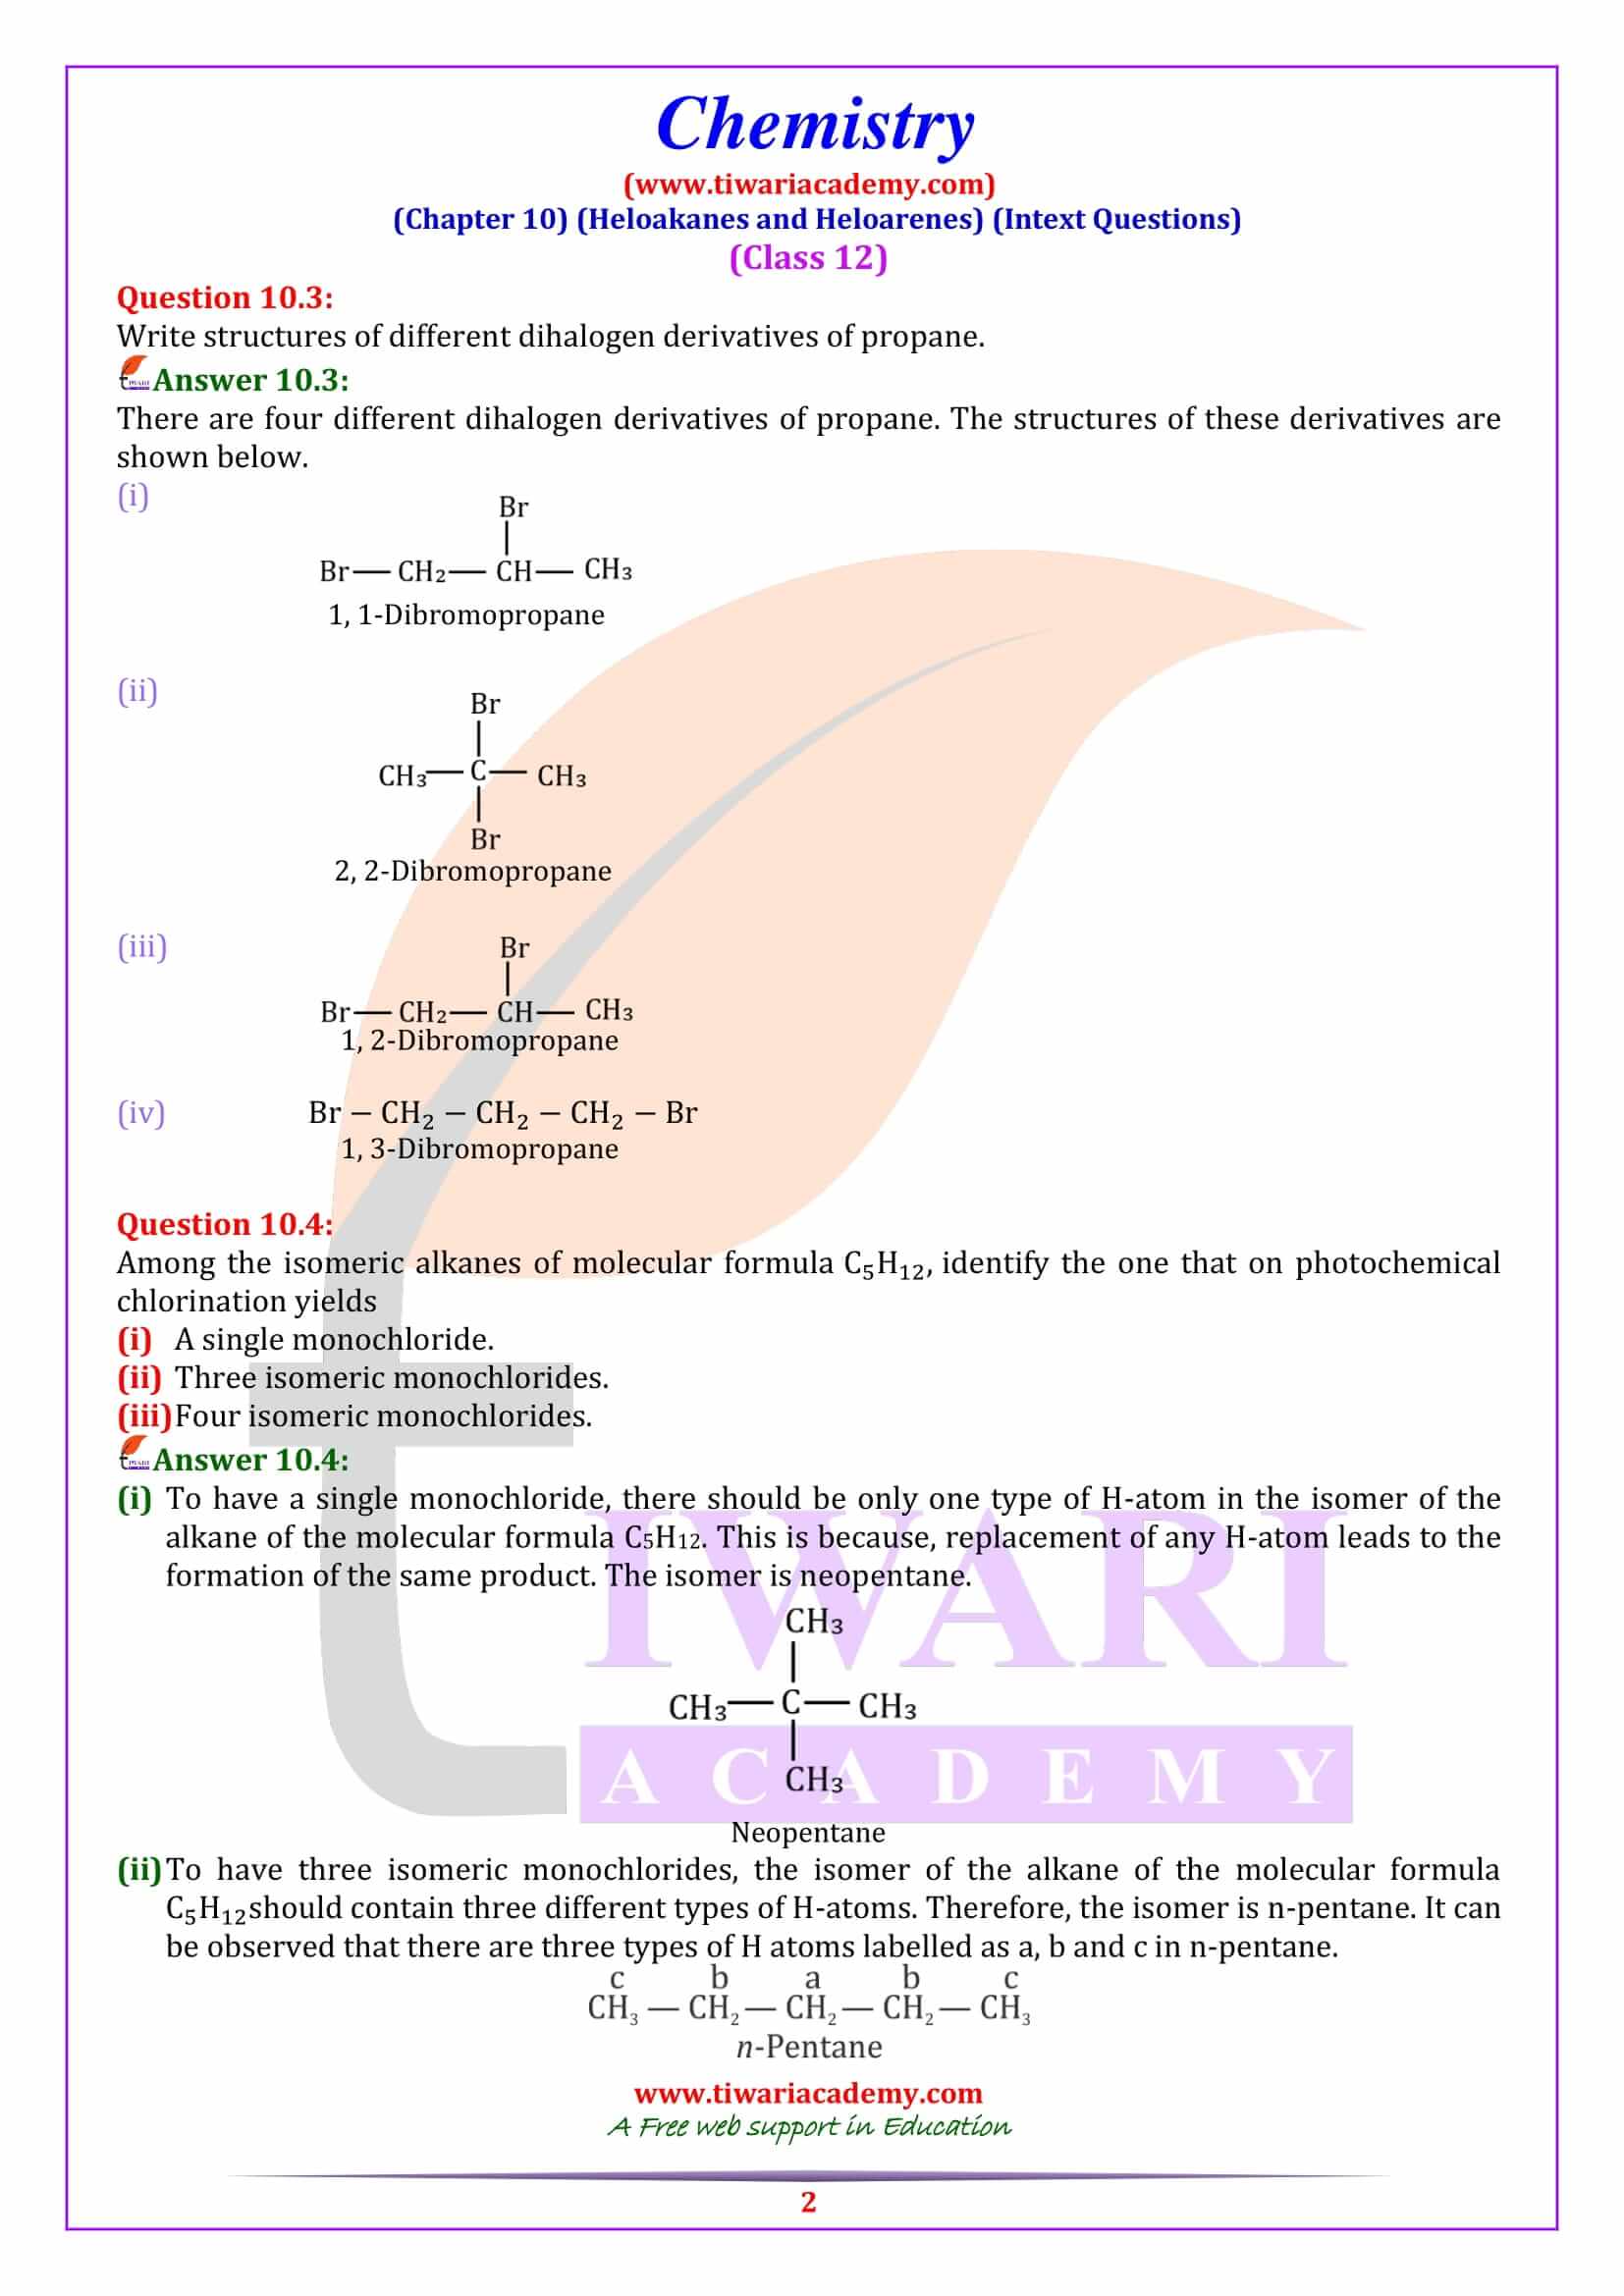 Class 12 Chemistry Chapter 10 Intext Question Answers